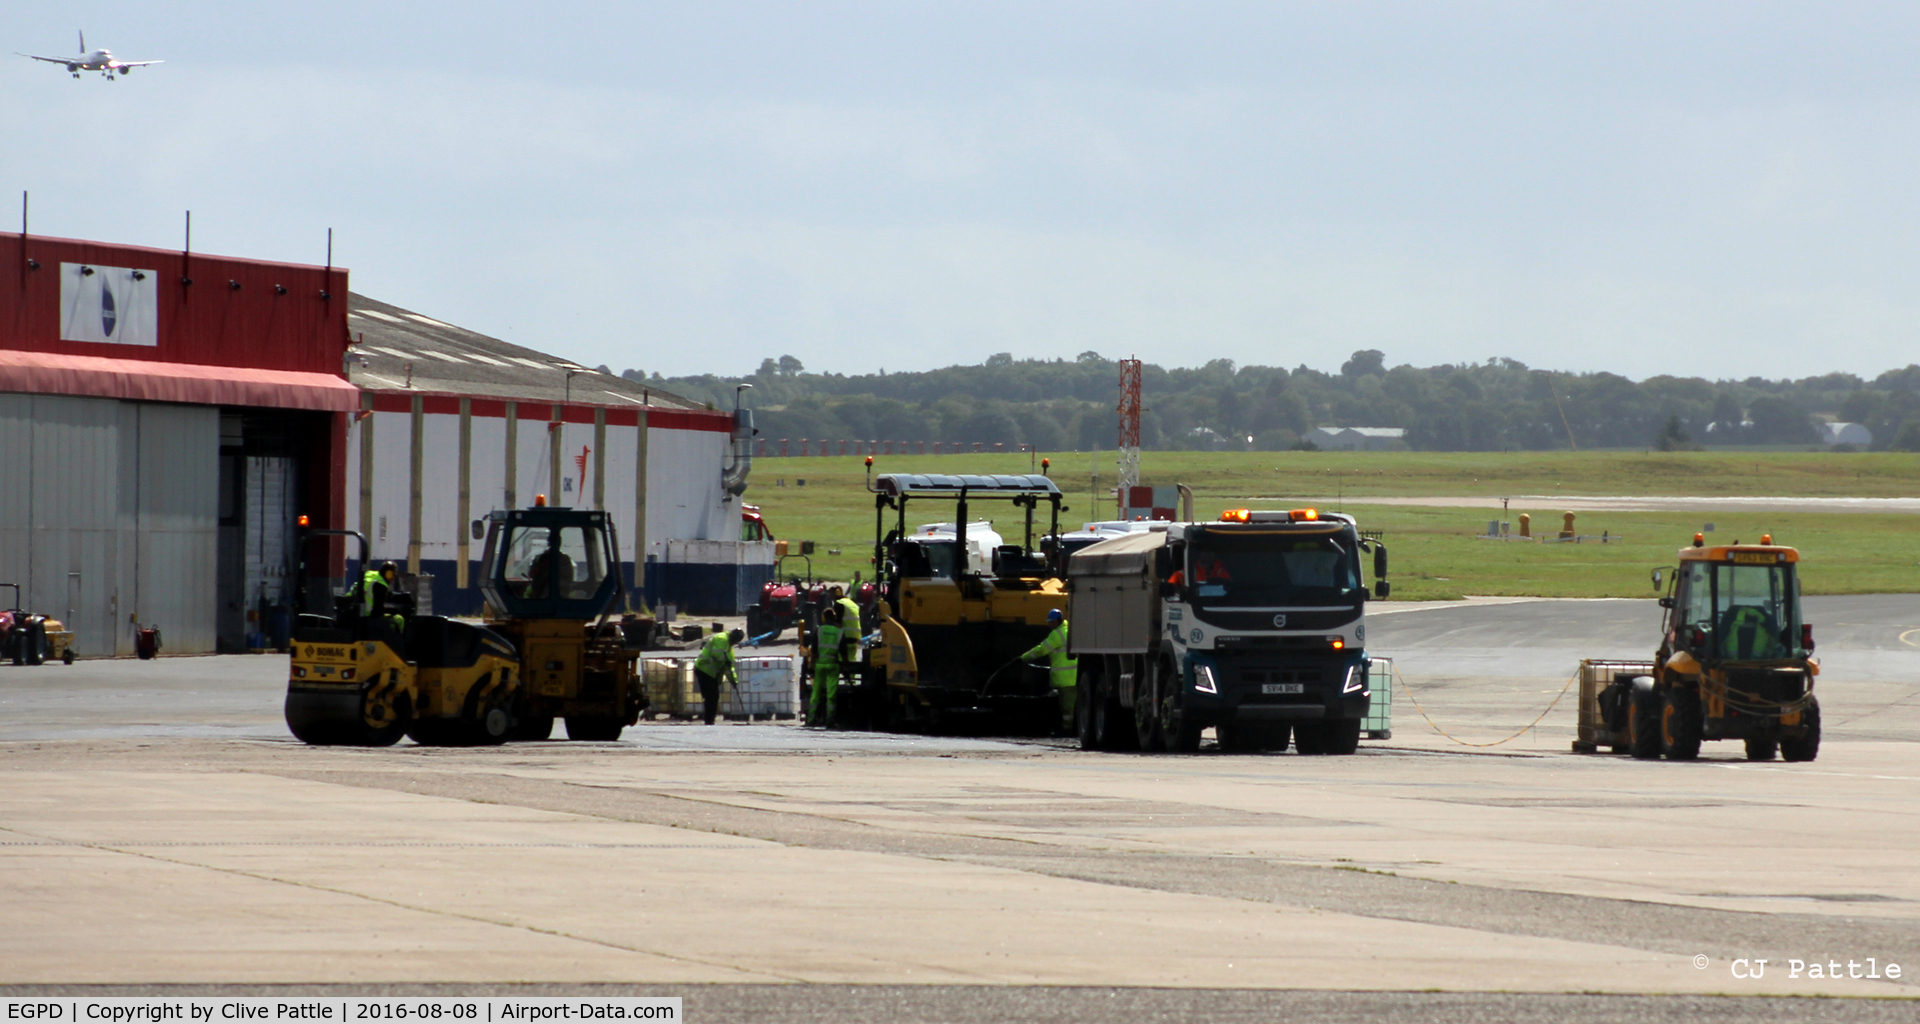 Aberdeen Airport, Aberdeen, Scotland United Kingdom (EGPD) - Re-surfacing work underway at the Babcock MCS Offshore (formerly Bond Helicopters) apron at Aberdeen